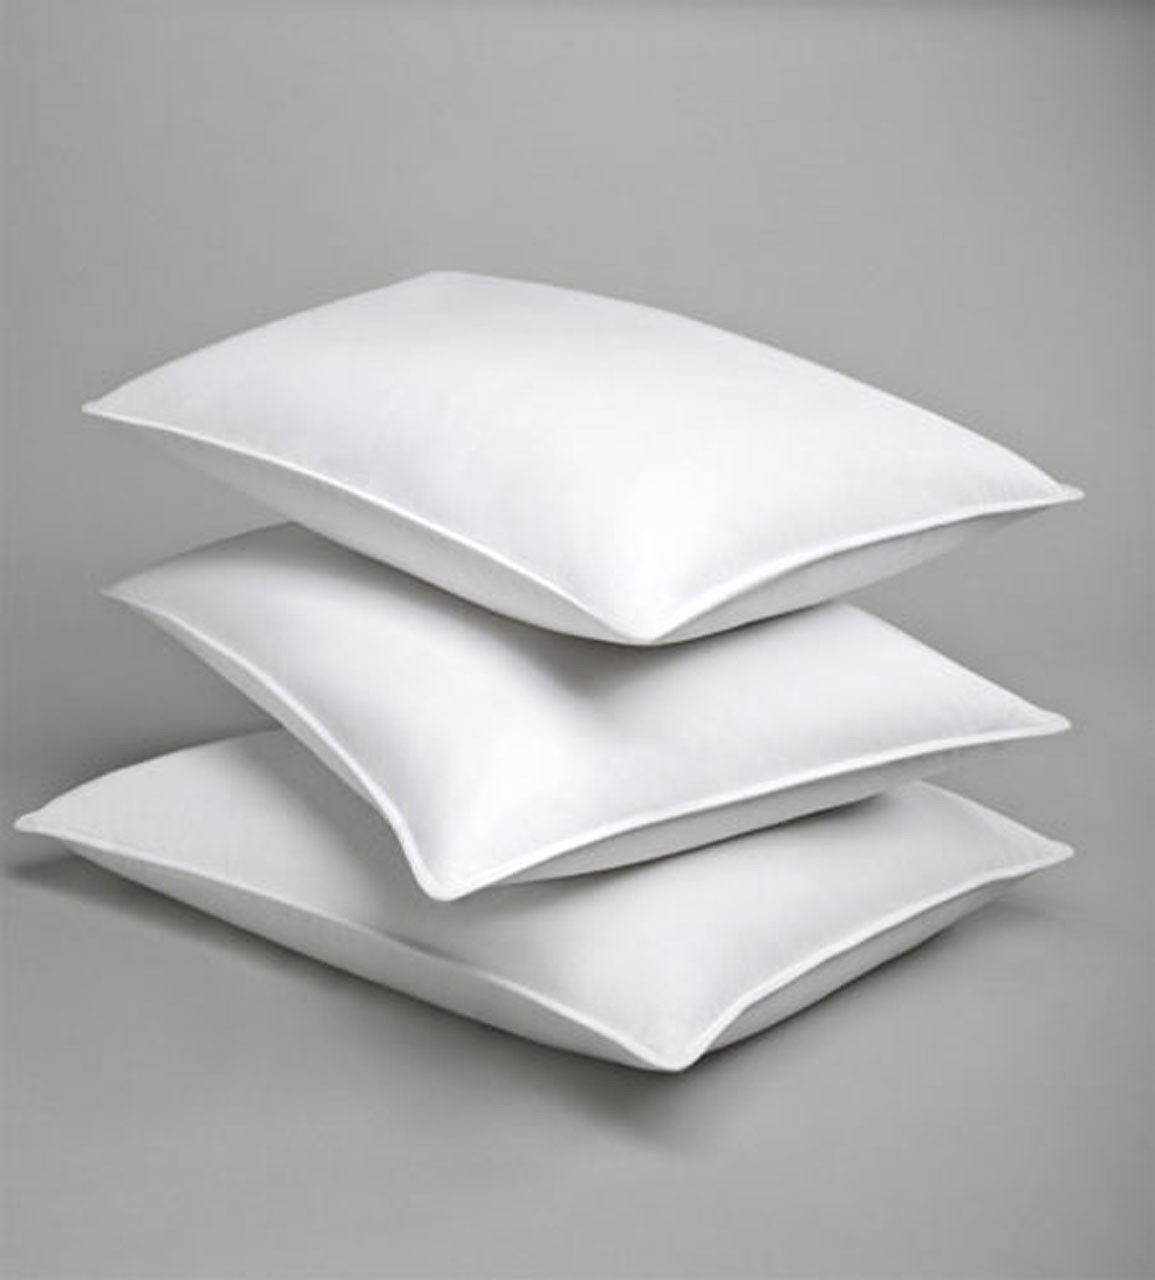 What makes the ChamberLoft pillow a performance-driven option for sleep?